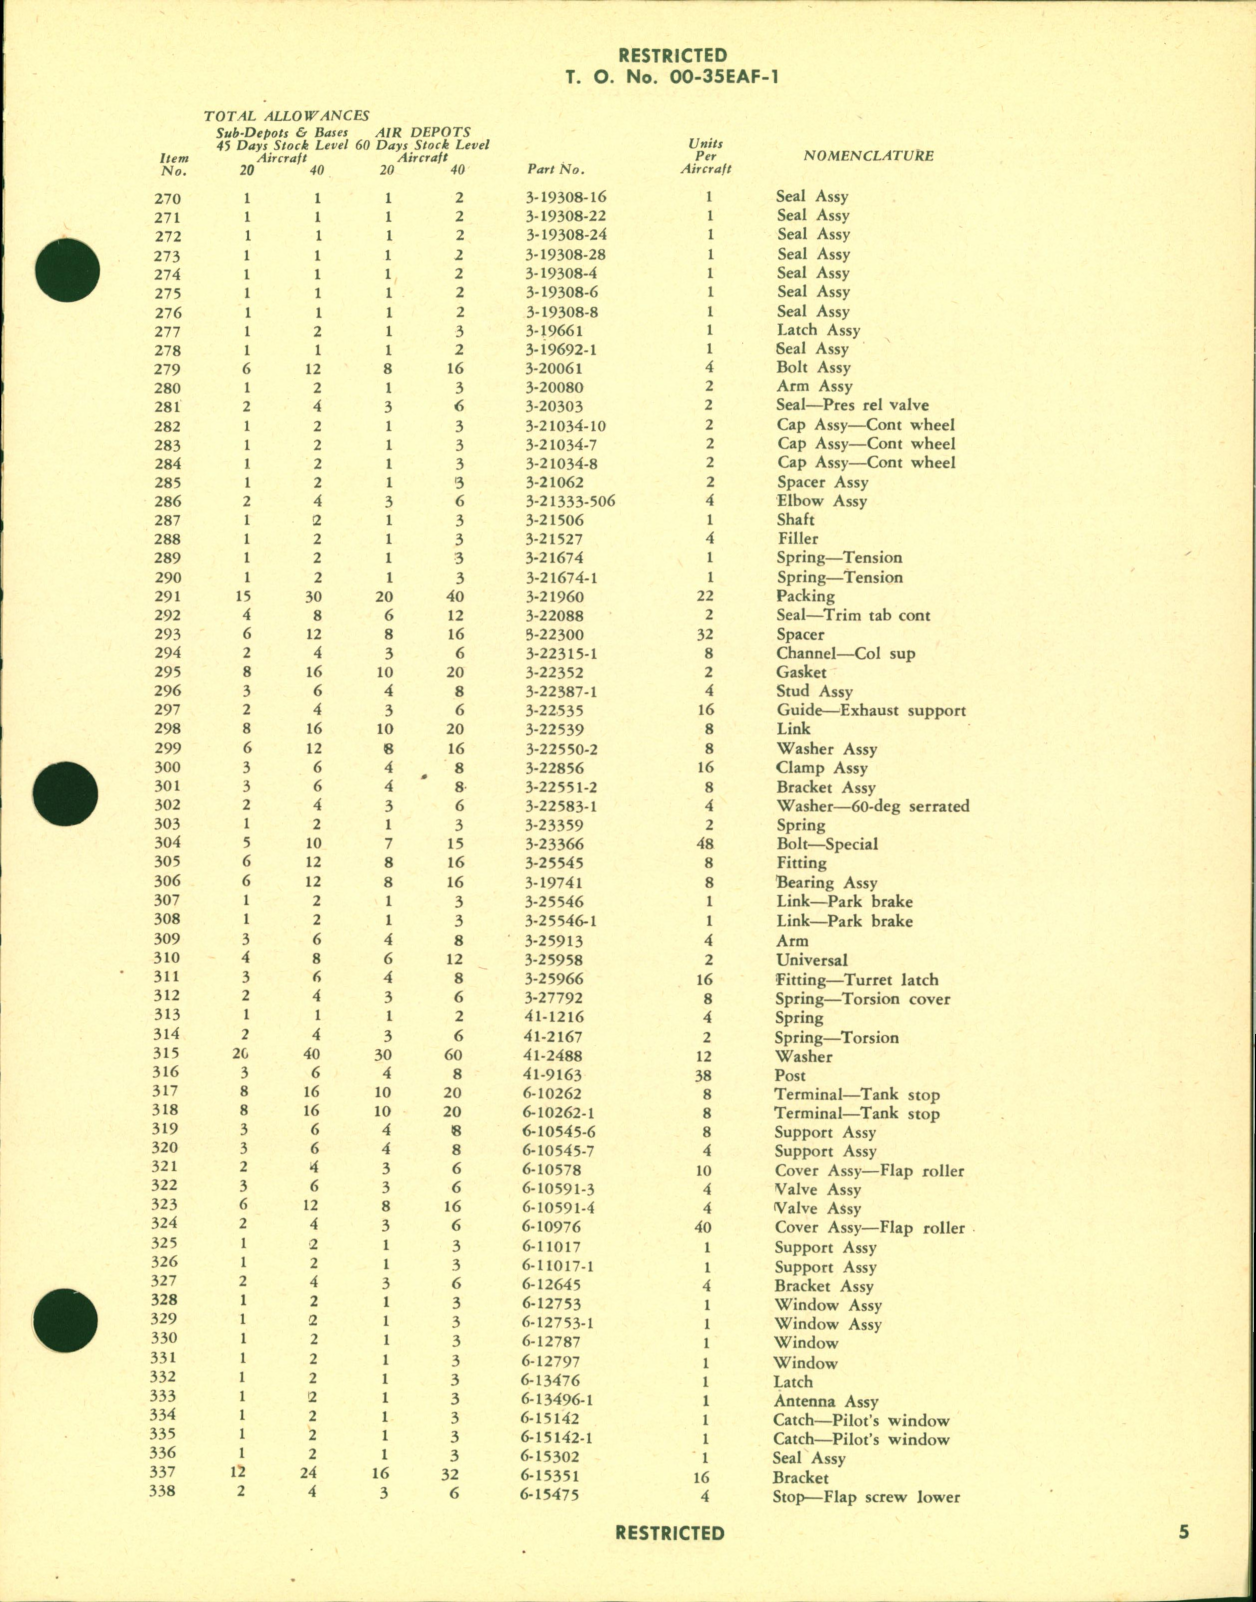 Sample page 7 from AirCorps Library document: Table of Credit - Airplane Maintenance Parts - for B-29 Aircraft